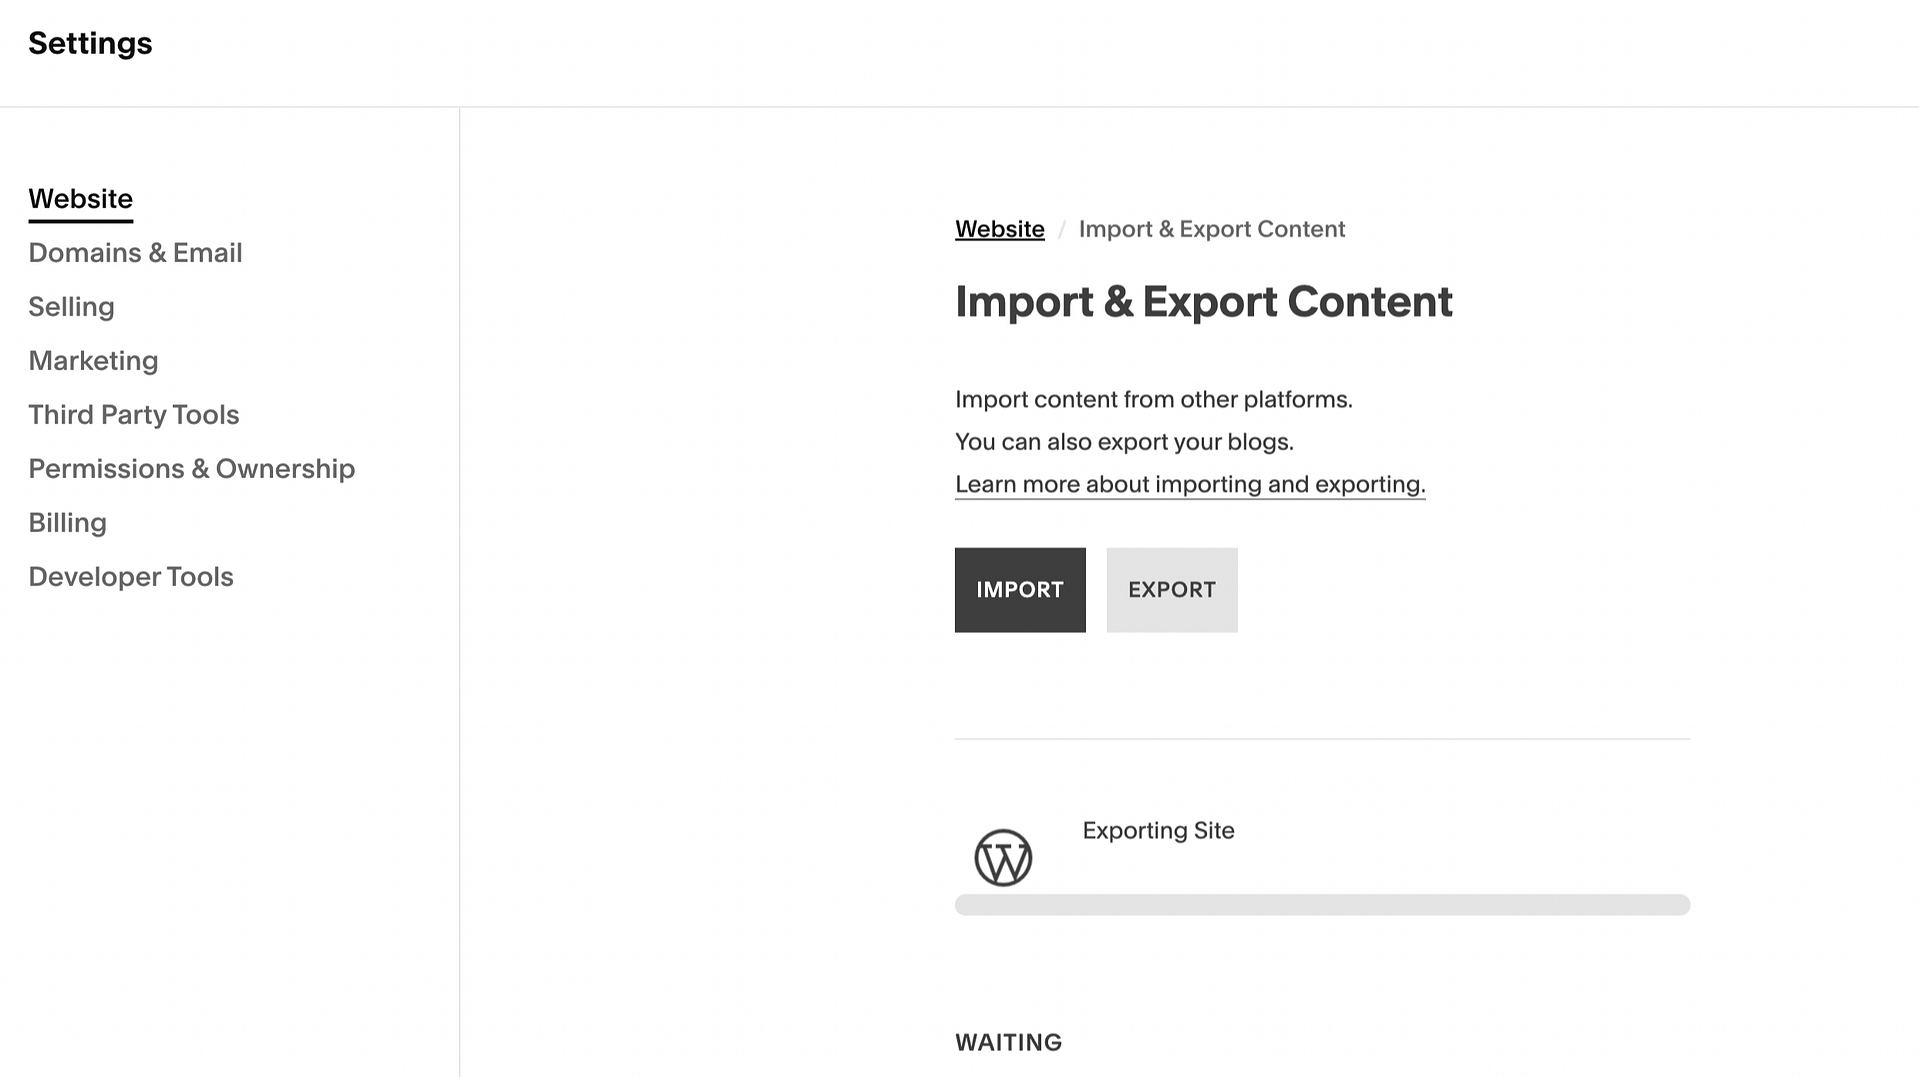 You'll need to export your site when making the switch from Squarespace to WordPress